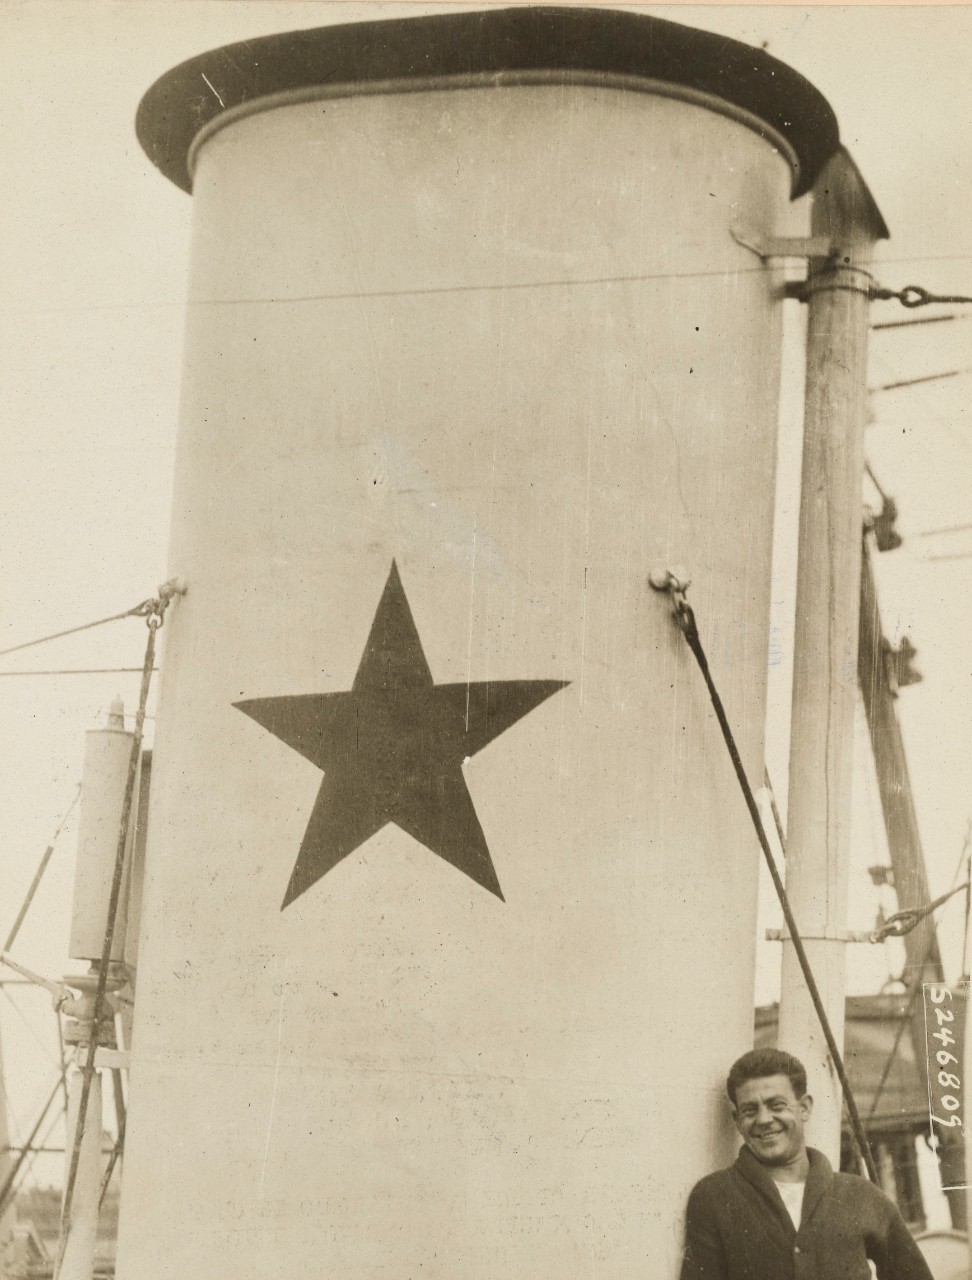 A star on the forward funnel of a U.S. Navy destroyer indicated that it had sunk a German submarine. National Archives 26432980